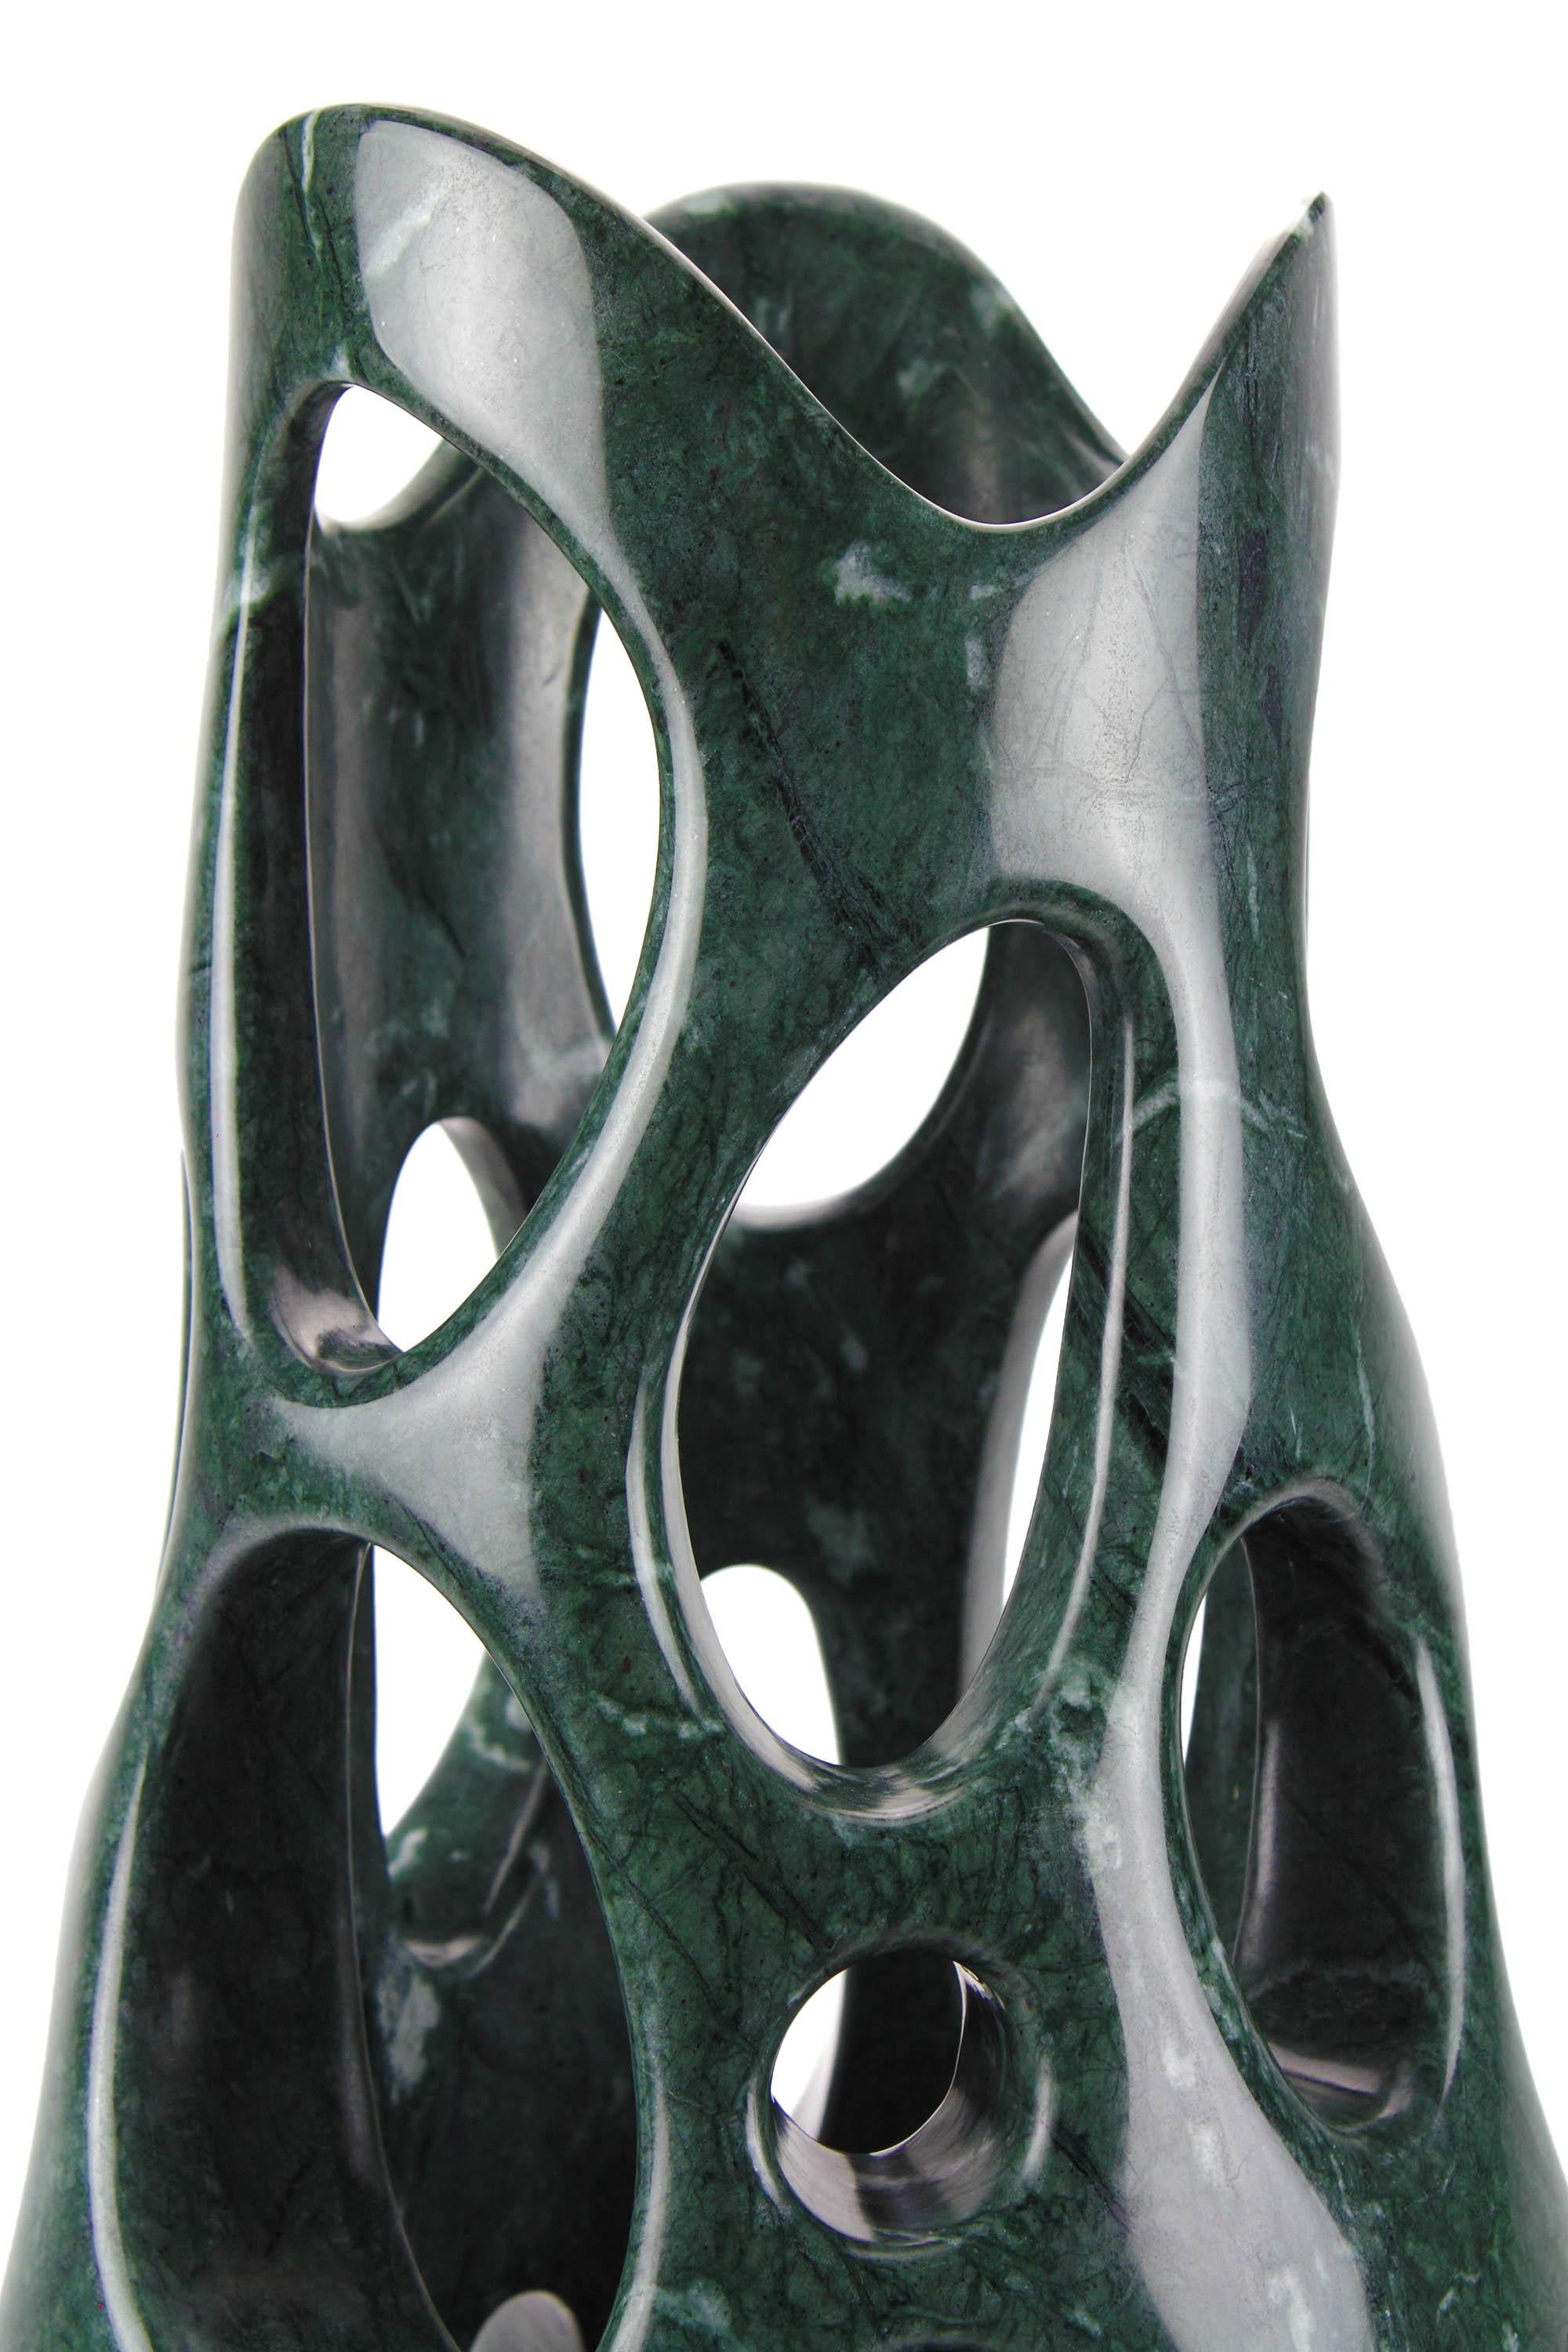 Modern Vase Vessel Sculpture Organic Shape Solid Imperial Green Marble Handmade Italy For Sale